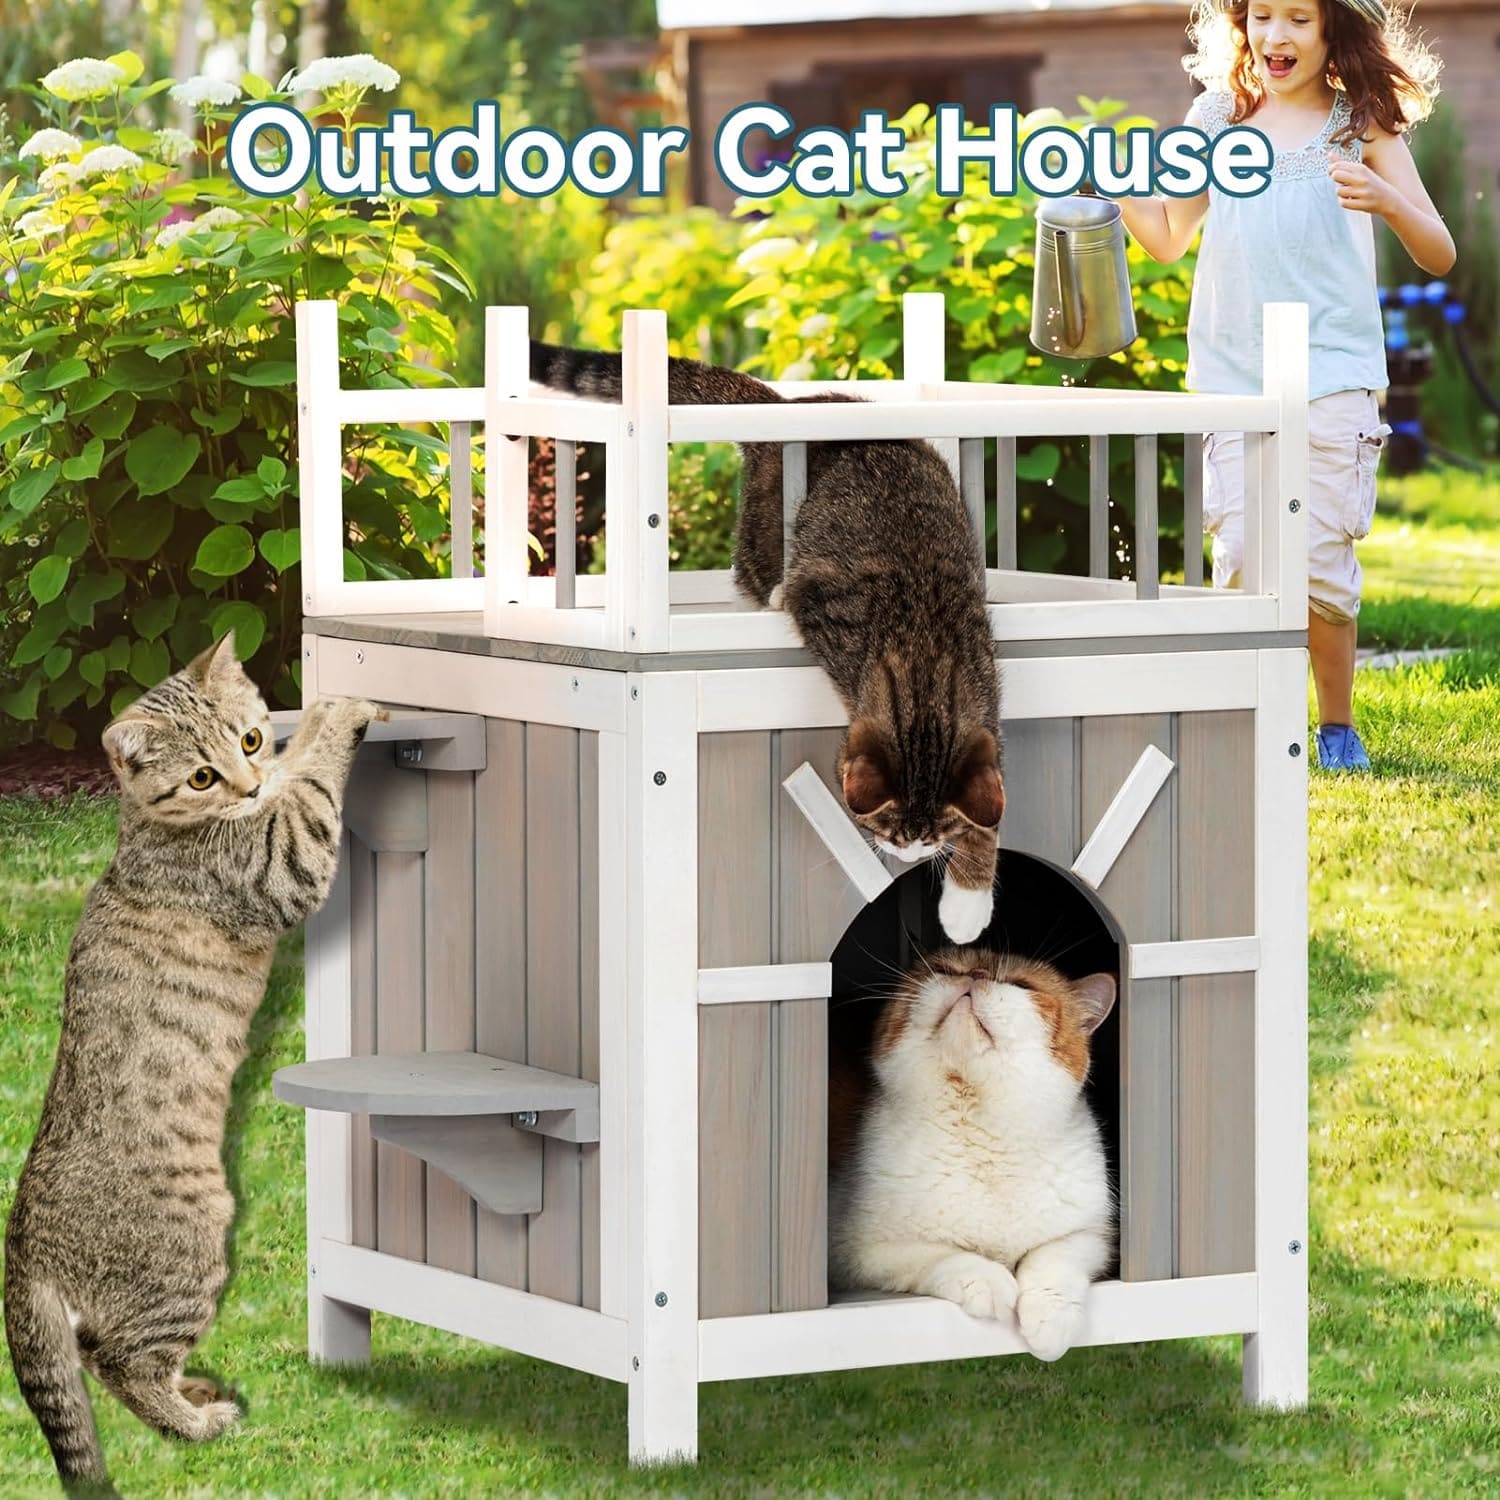 Petsfit Cat House Cat Condos Cat Feeding Station for Outdoor Indoor Cats Kittens,2 Story Wood Feral Cat Shelter Cage Weatherproof with Balcony and 2 Removable Floors Gray